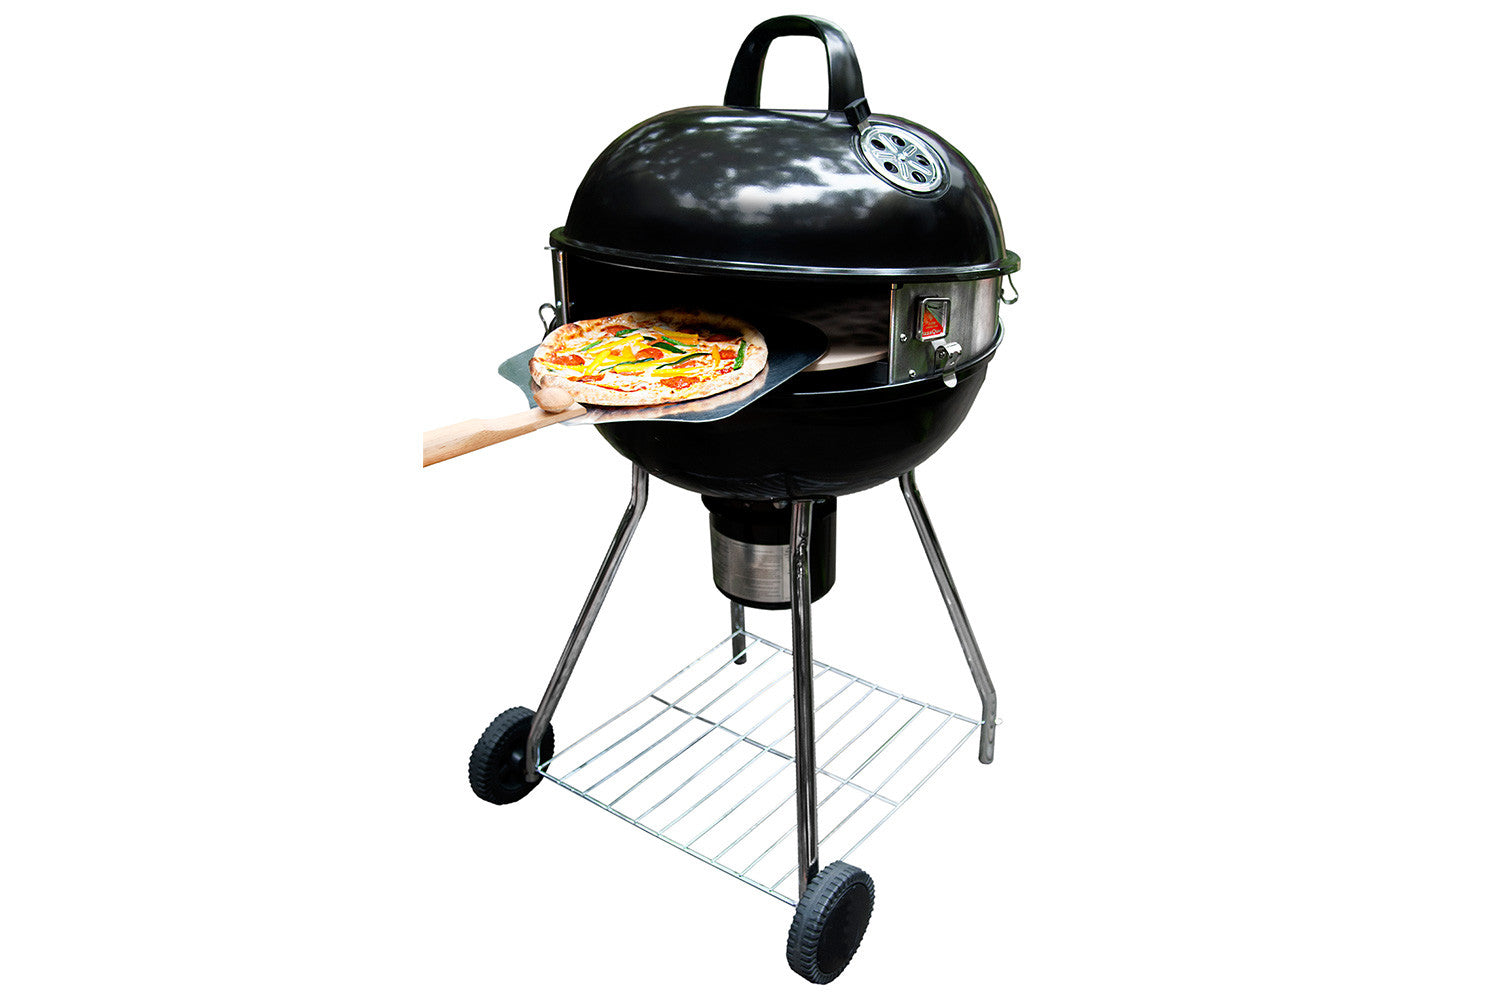 The BEST Grilled Pizza, Pizza on a Weber Grill